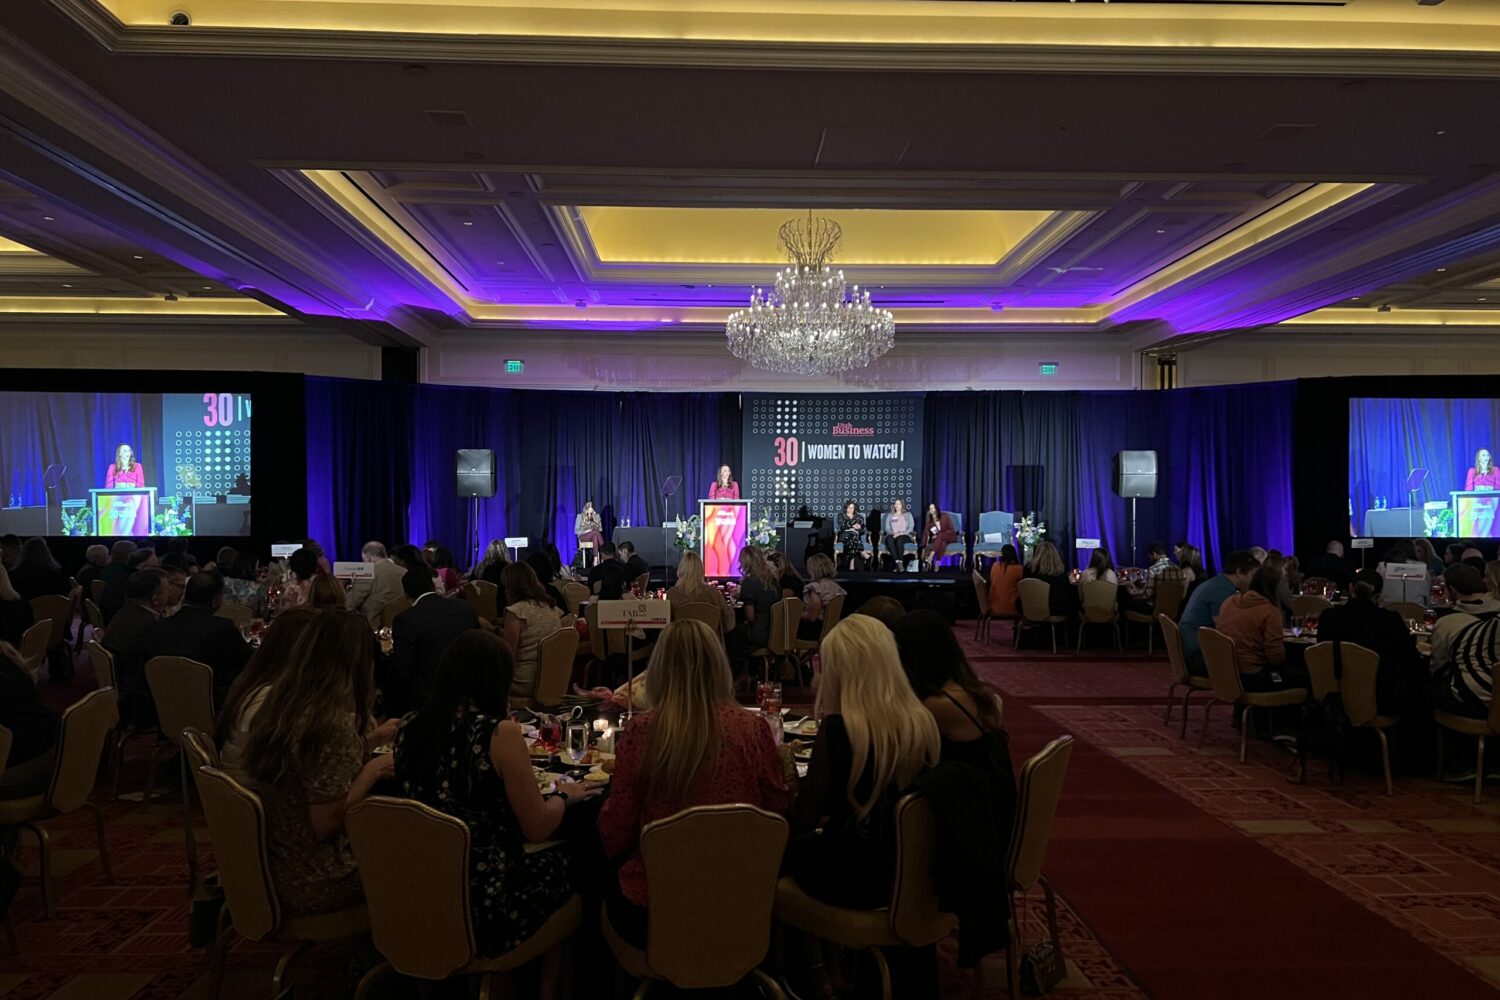 Utah Business recognizes and celebrates the people and companies behind Utah's business successes—here's how to win an award from Utah Business.